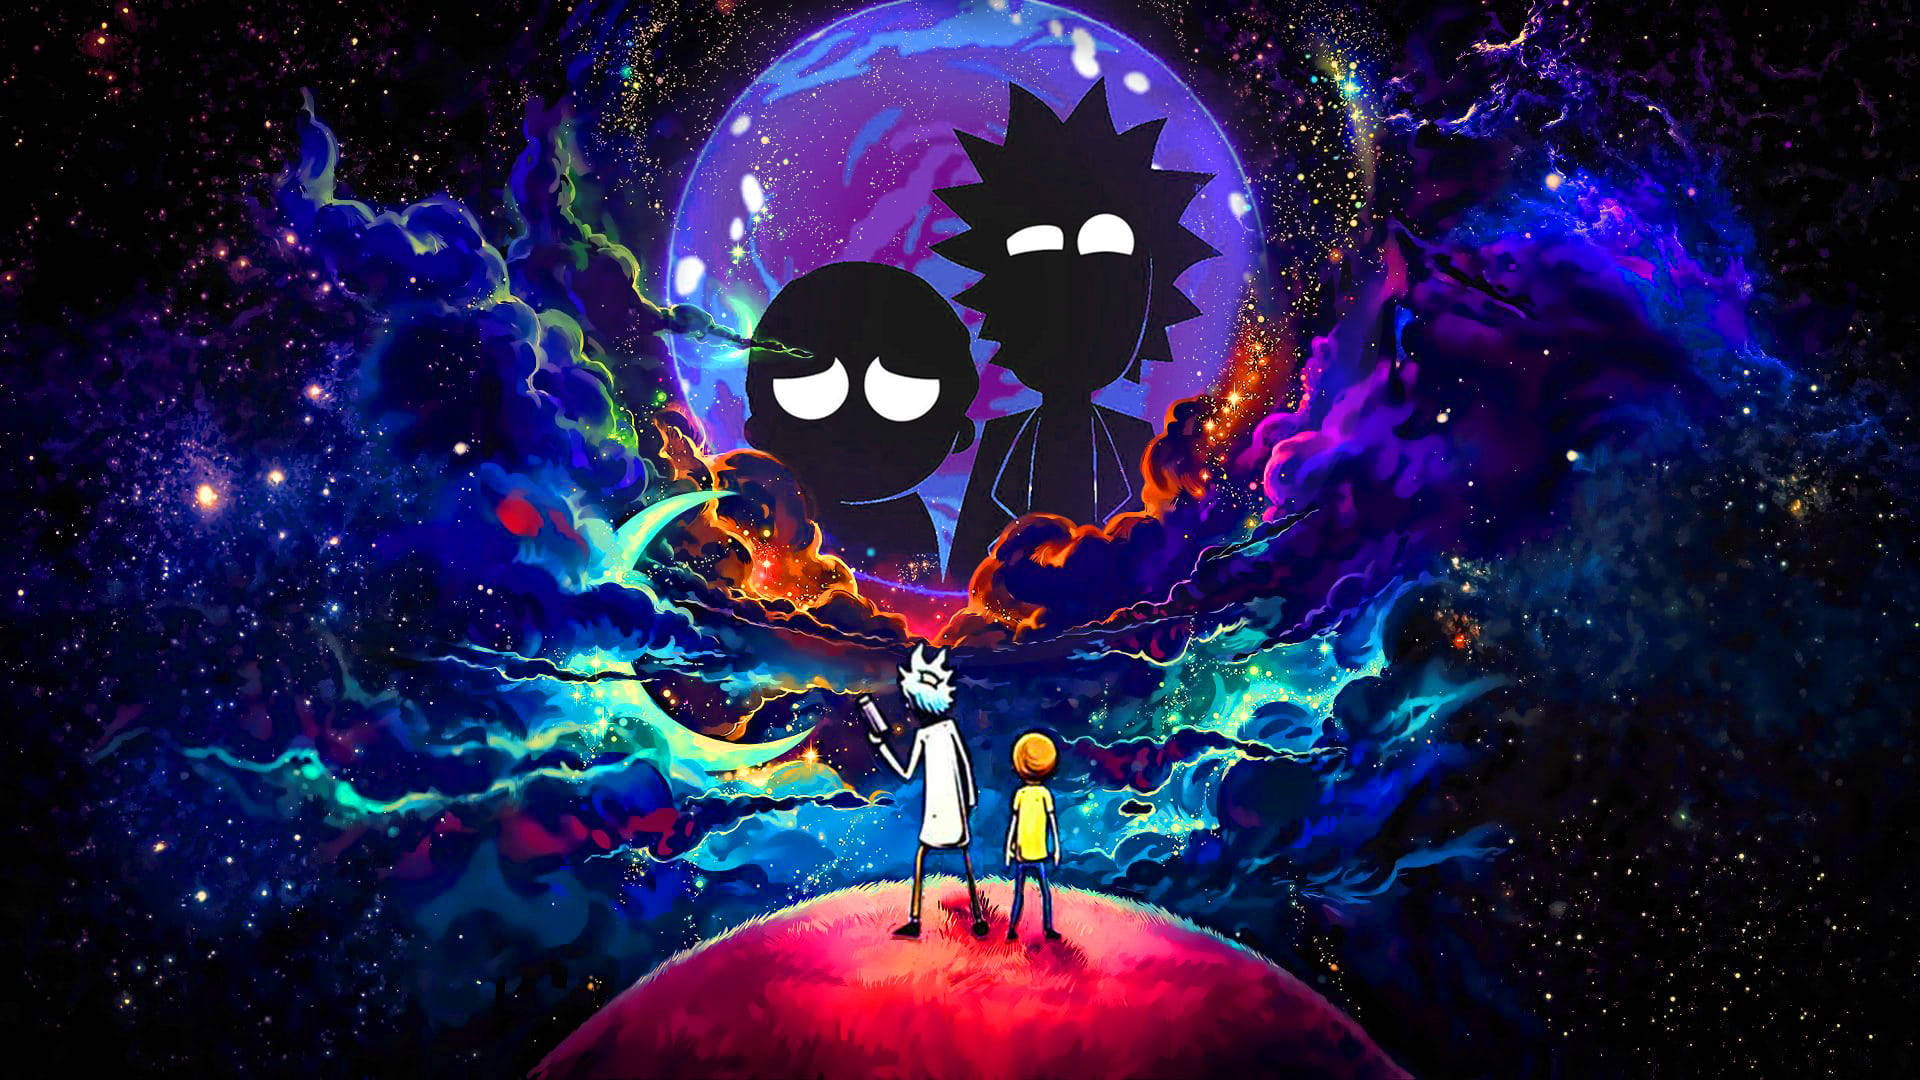 Free Rick And Morty Cool Background Photo, Rick And Morty Cool Background for FREE